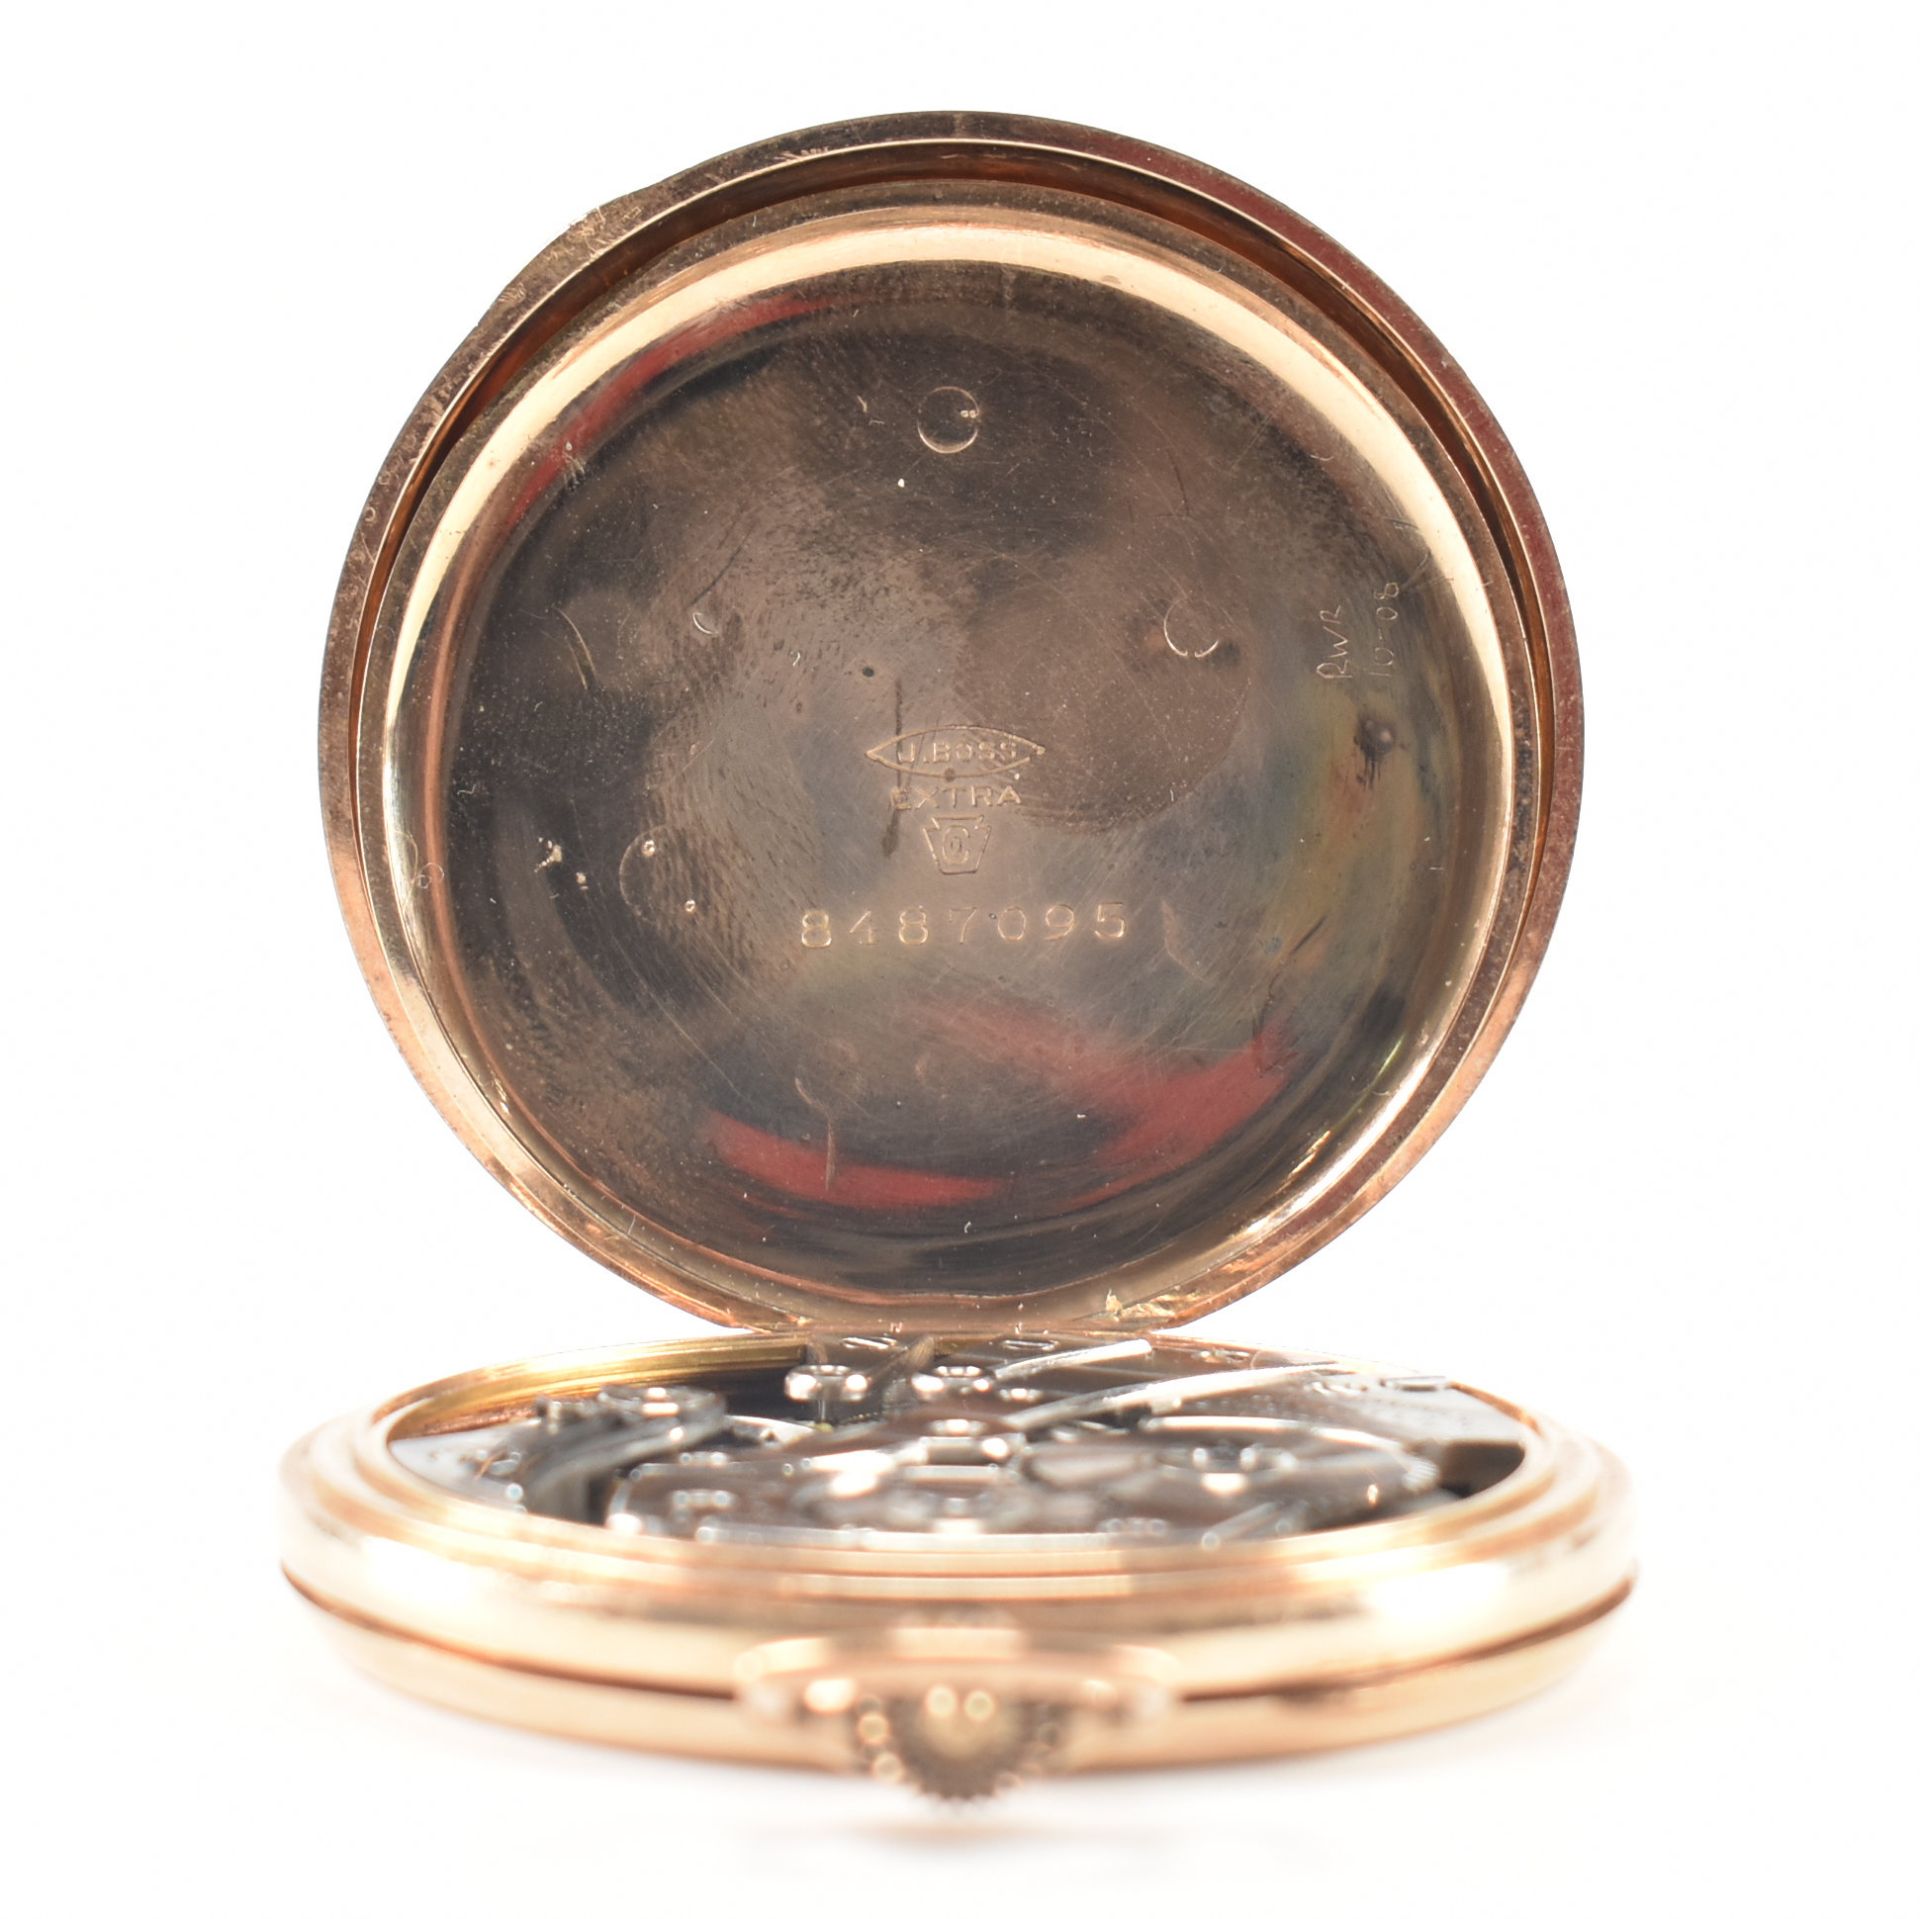 VINTAGE GOLD PLATED OPEN FACE POCKET WATCH - Image 7 of 8